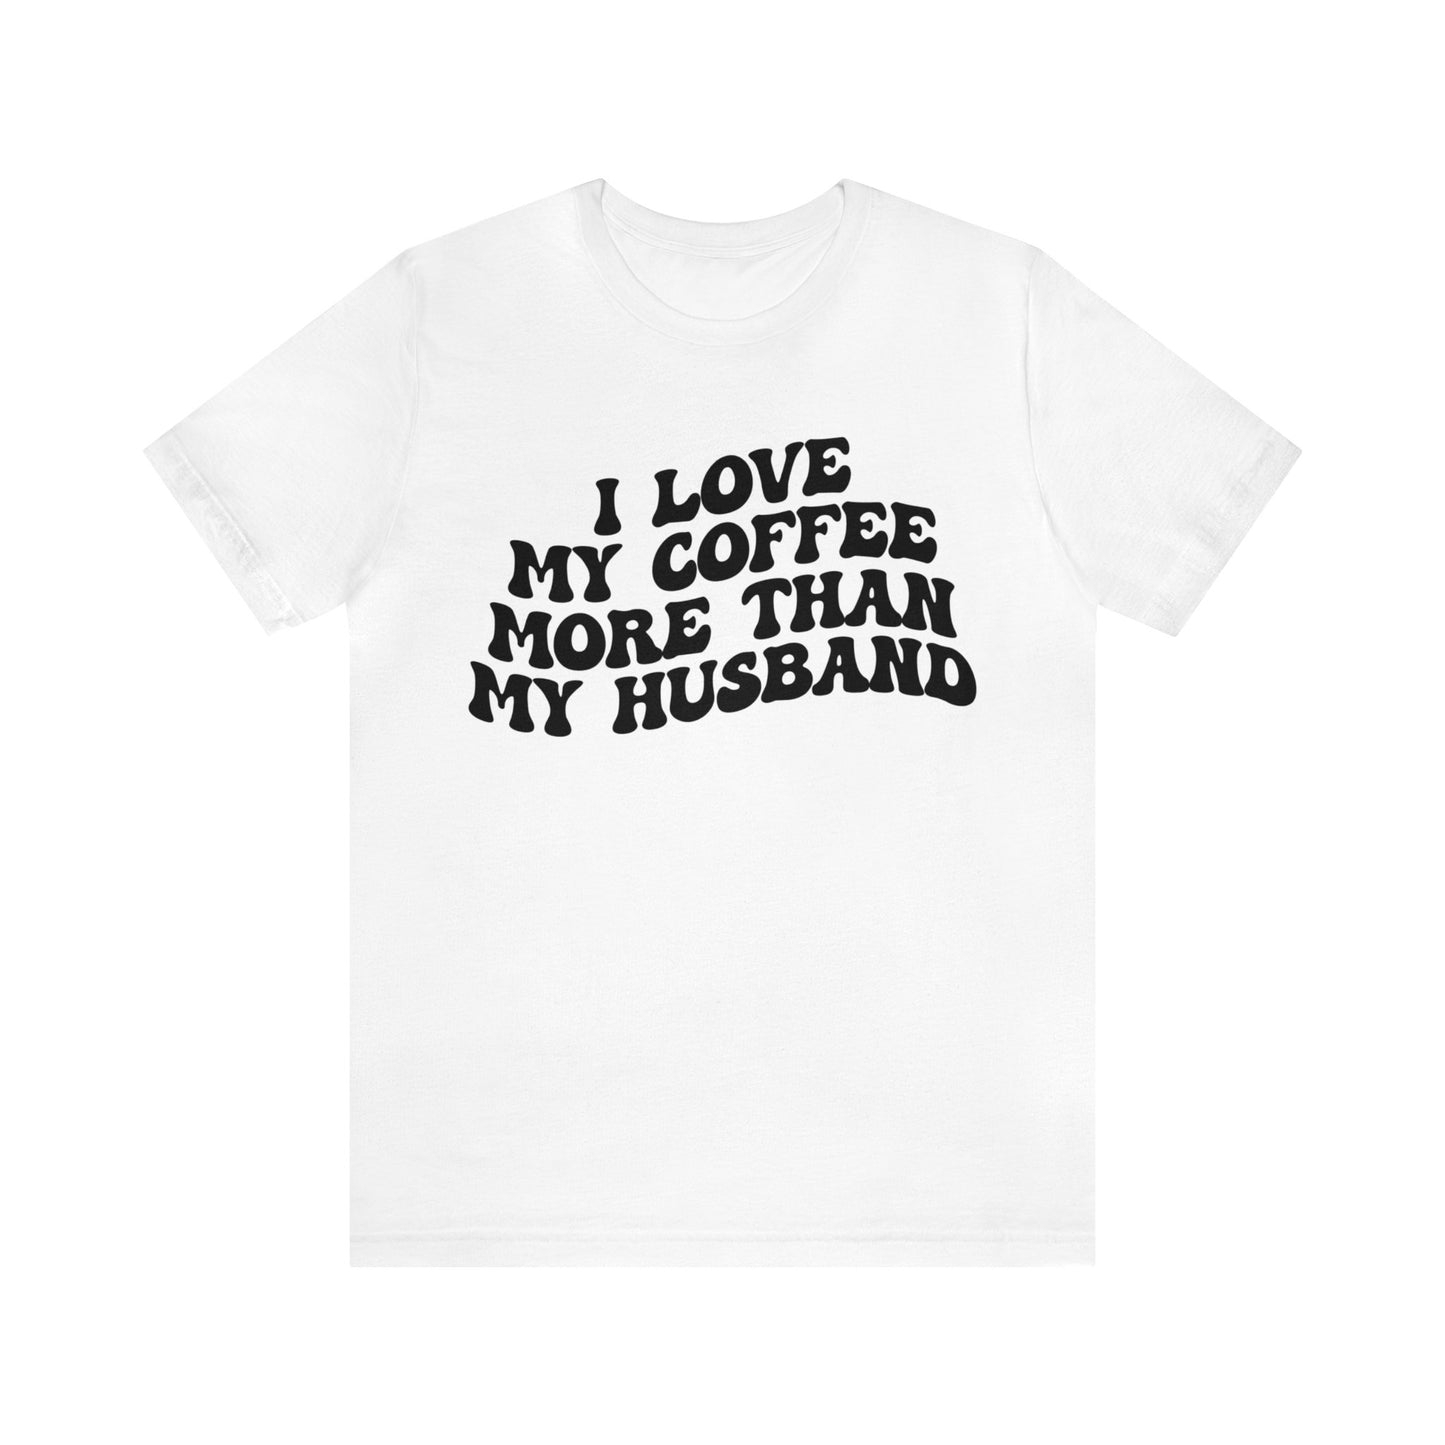 I Love My Coffee More Than My Husband Shirt, Funny Coffee Shirt, Husband Gift, Gift For Husband, Gift for lover Coffee, T1438